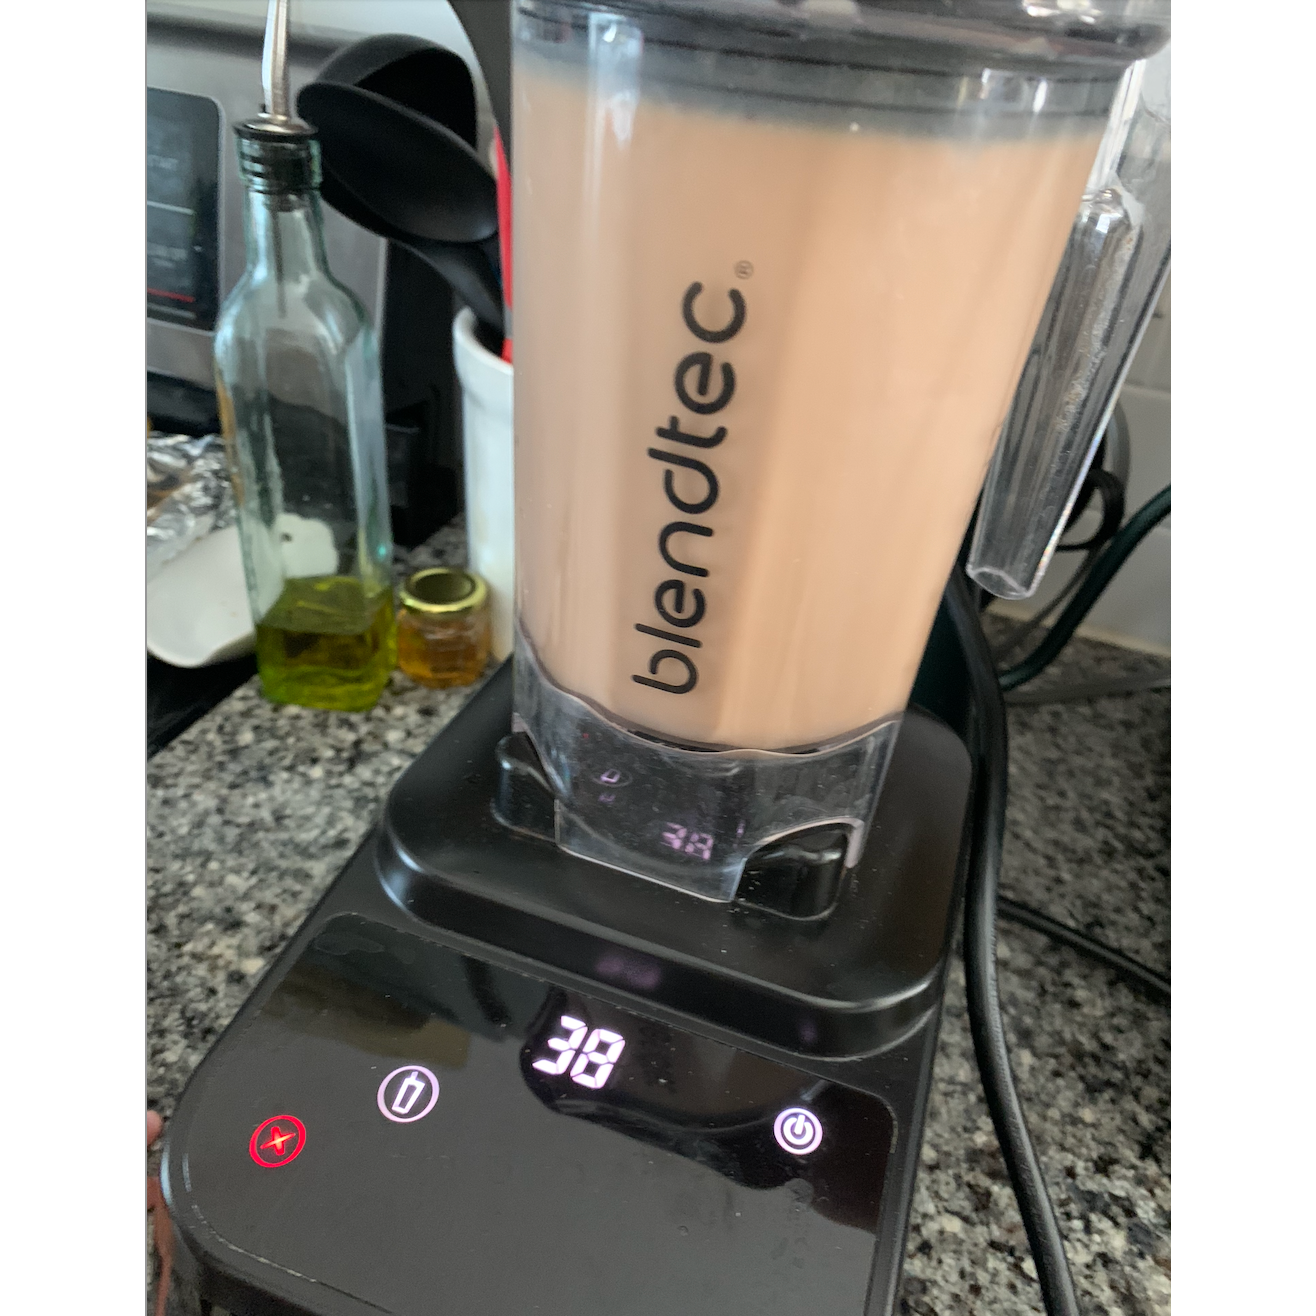 Blendtec blender with a smoothie in it